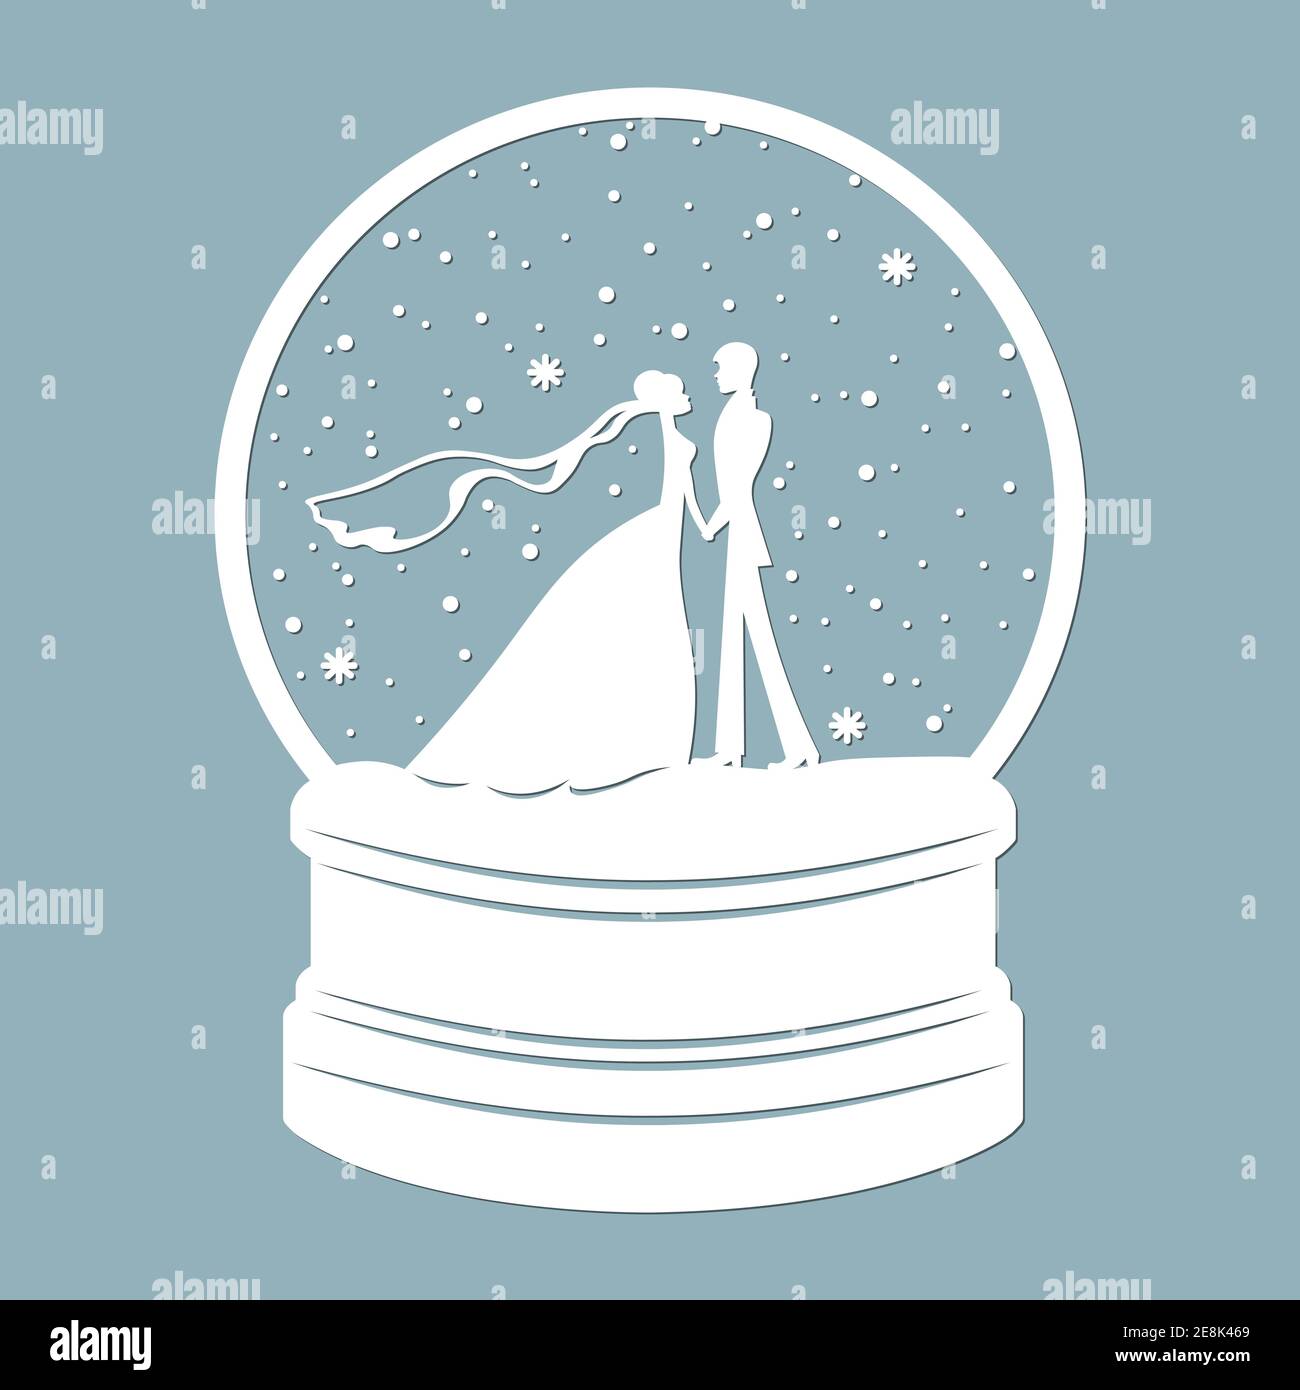 Snow globe, inside the bride and groom. Laser cutting. Vector illustration. Template for laser cutting, plotter and screen printing. Stock Vector